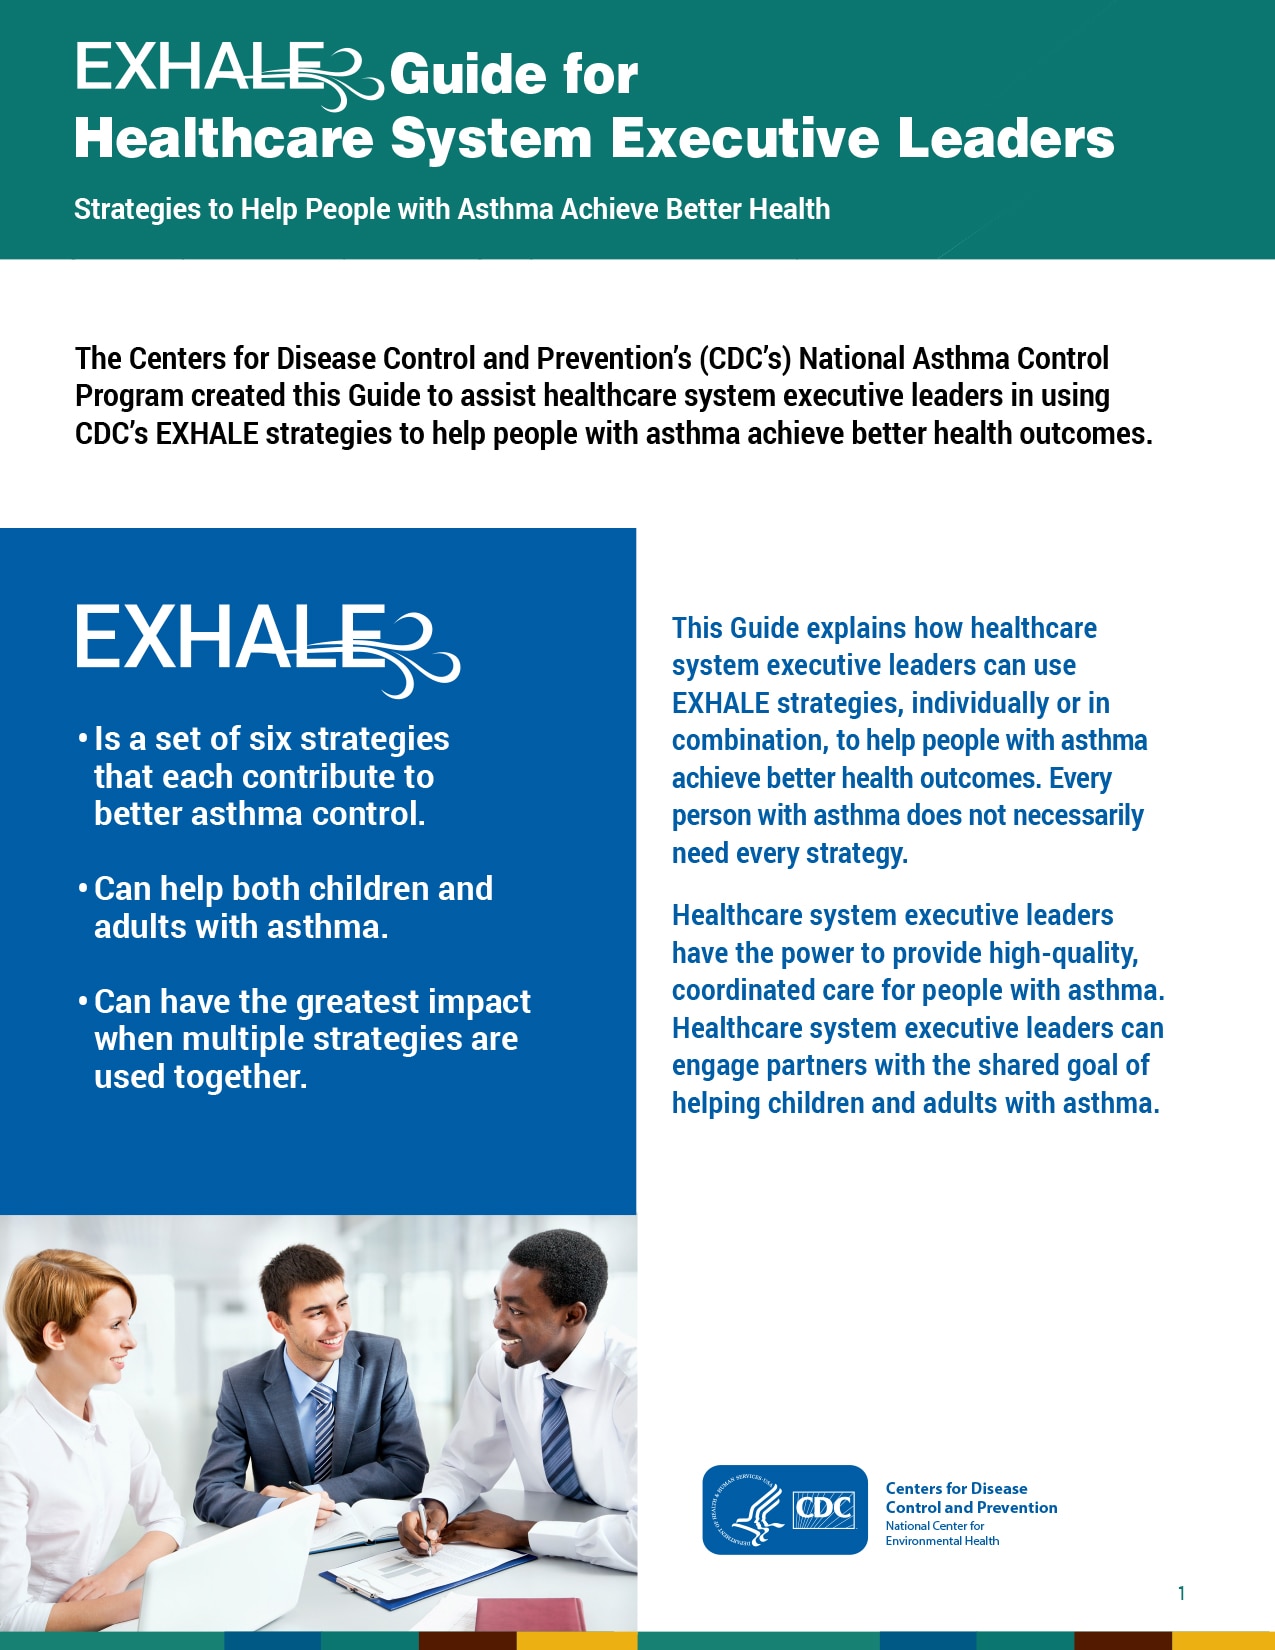 EXHALE Guide for Healthcare System Executive Leaders